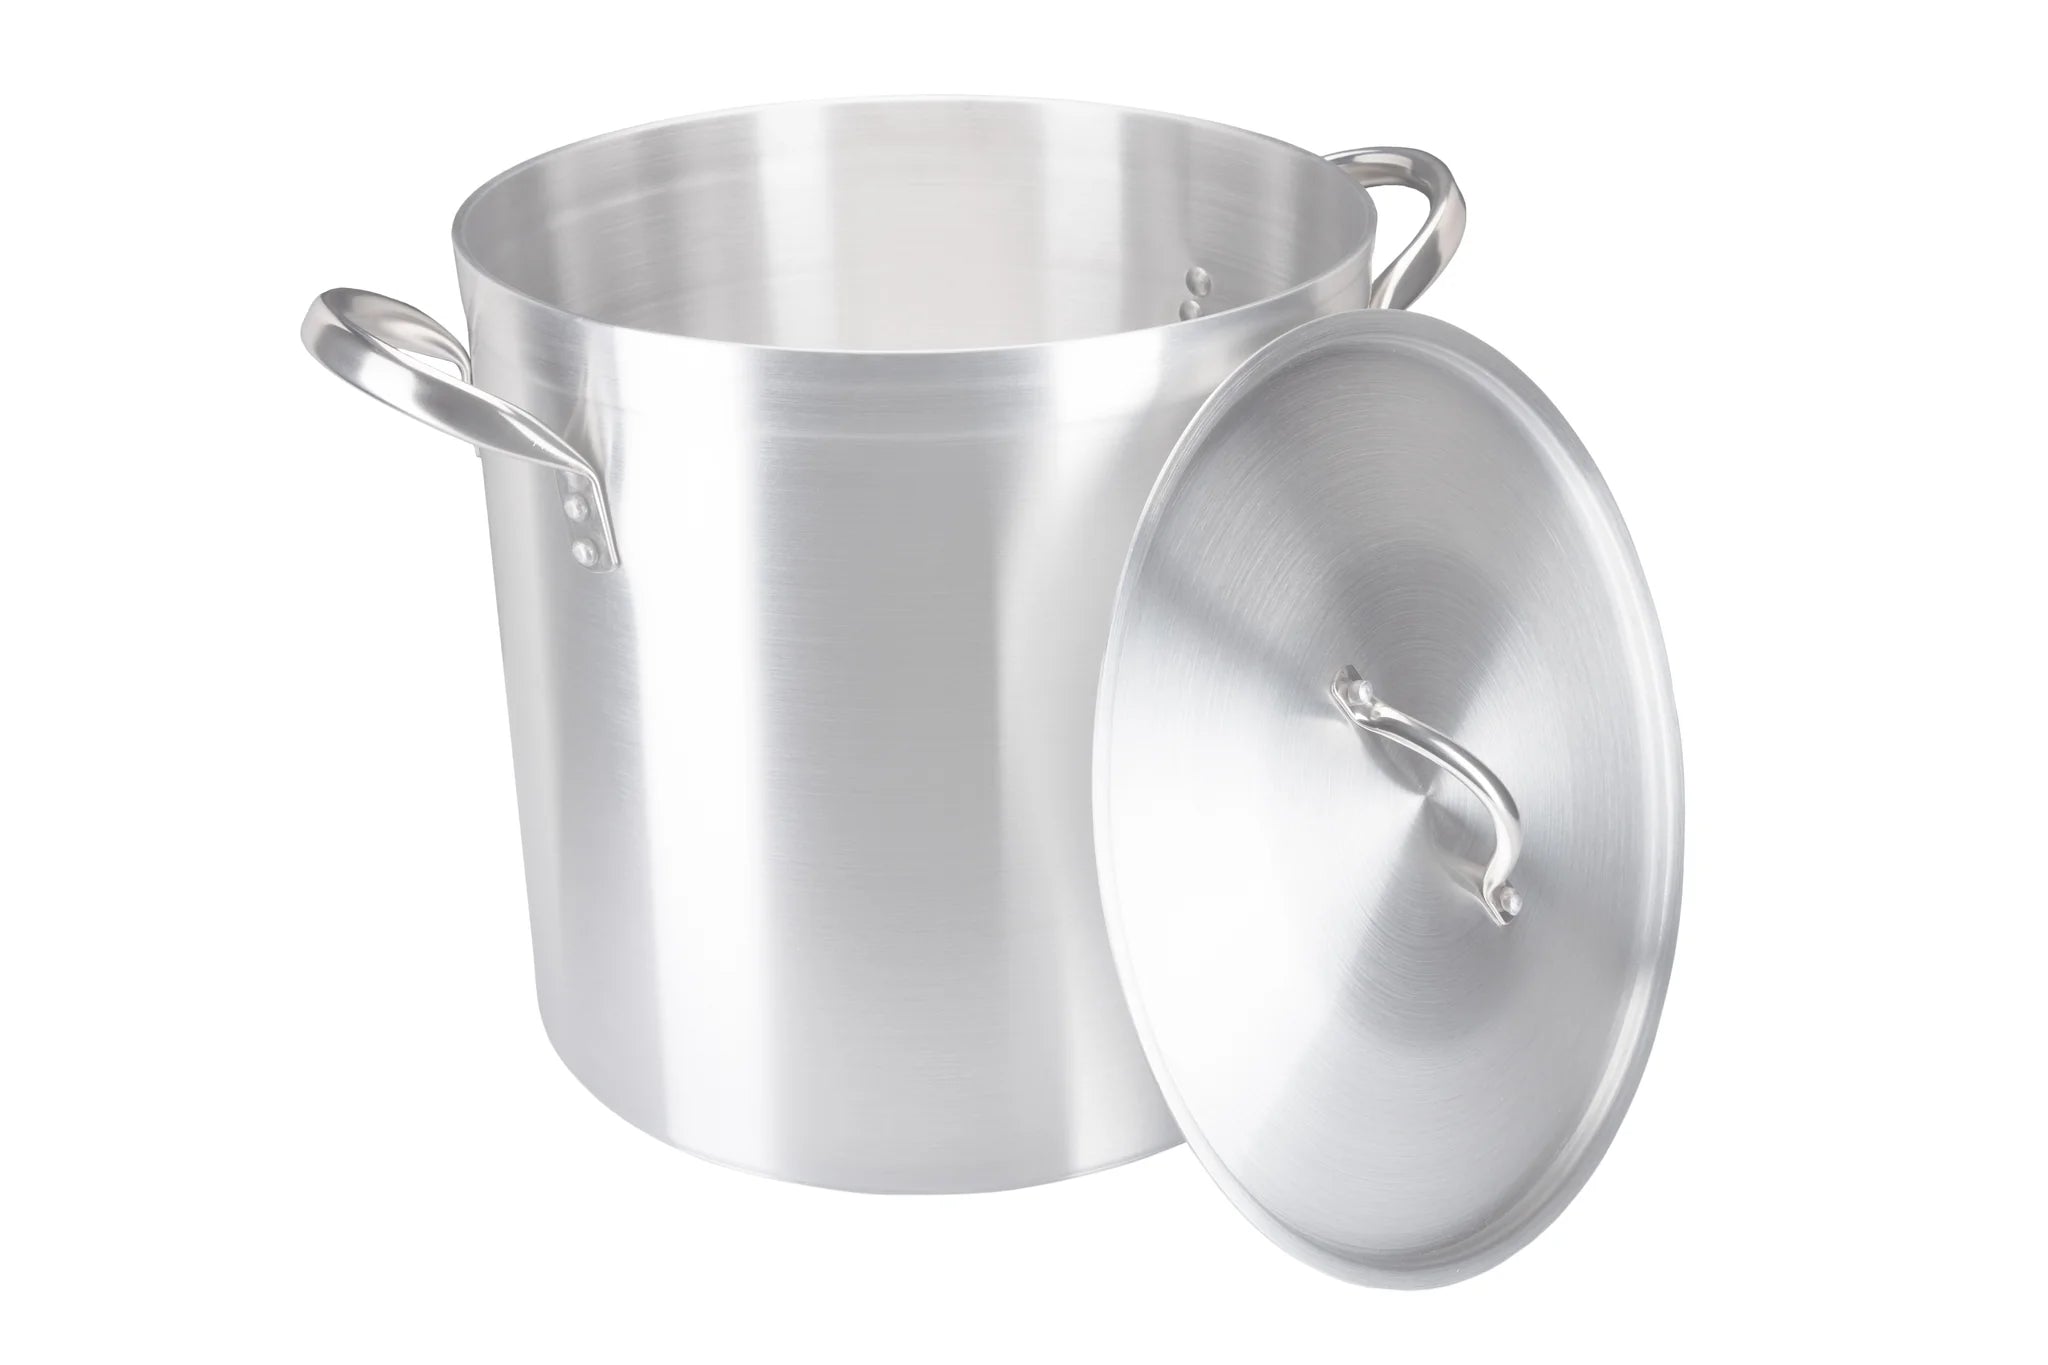 32cm Aluminium 26 LITRE Stockpot.Product Ref:00835. IN STOCK -🚚 1-3 Days Delivery